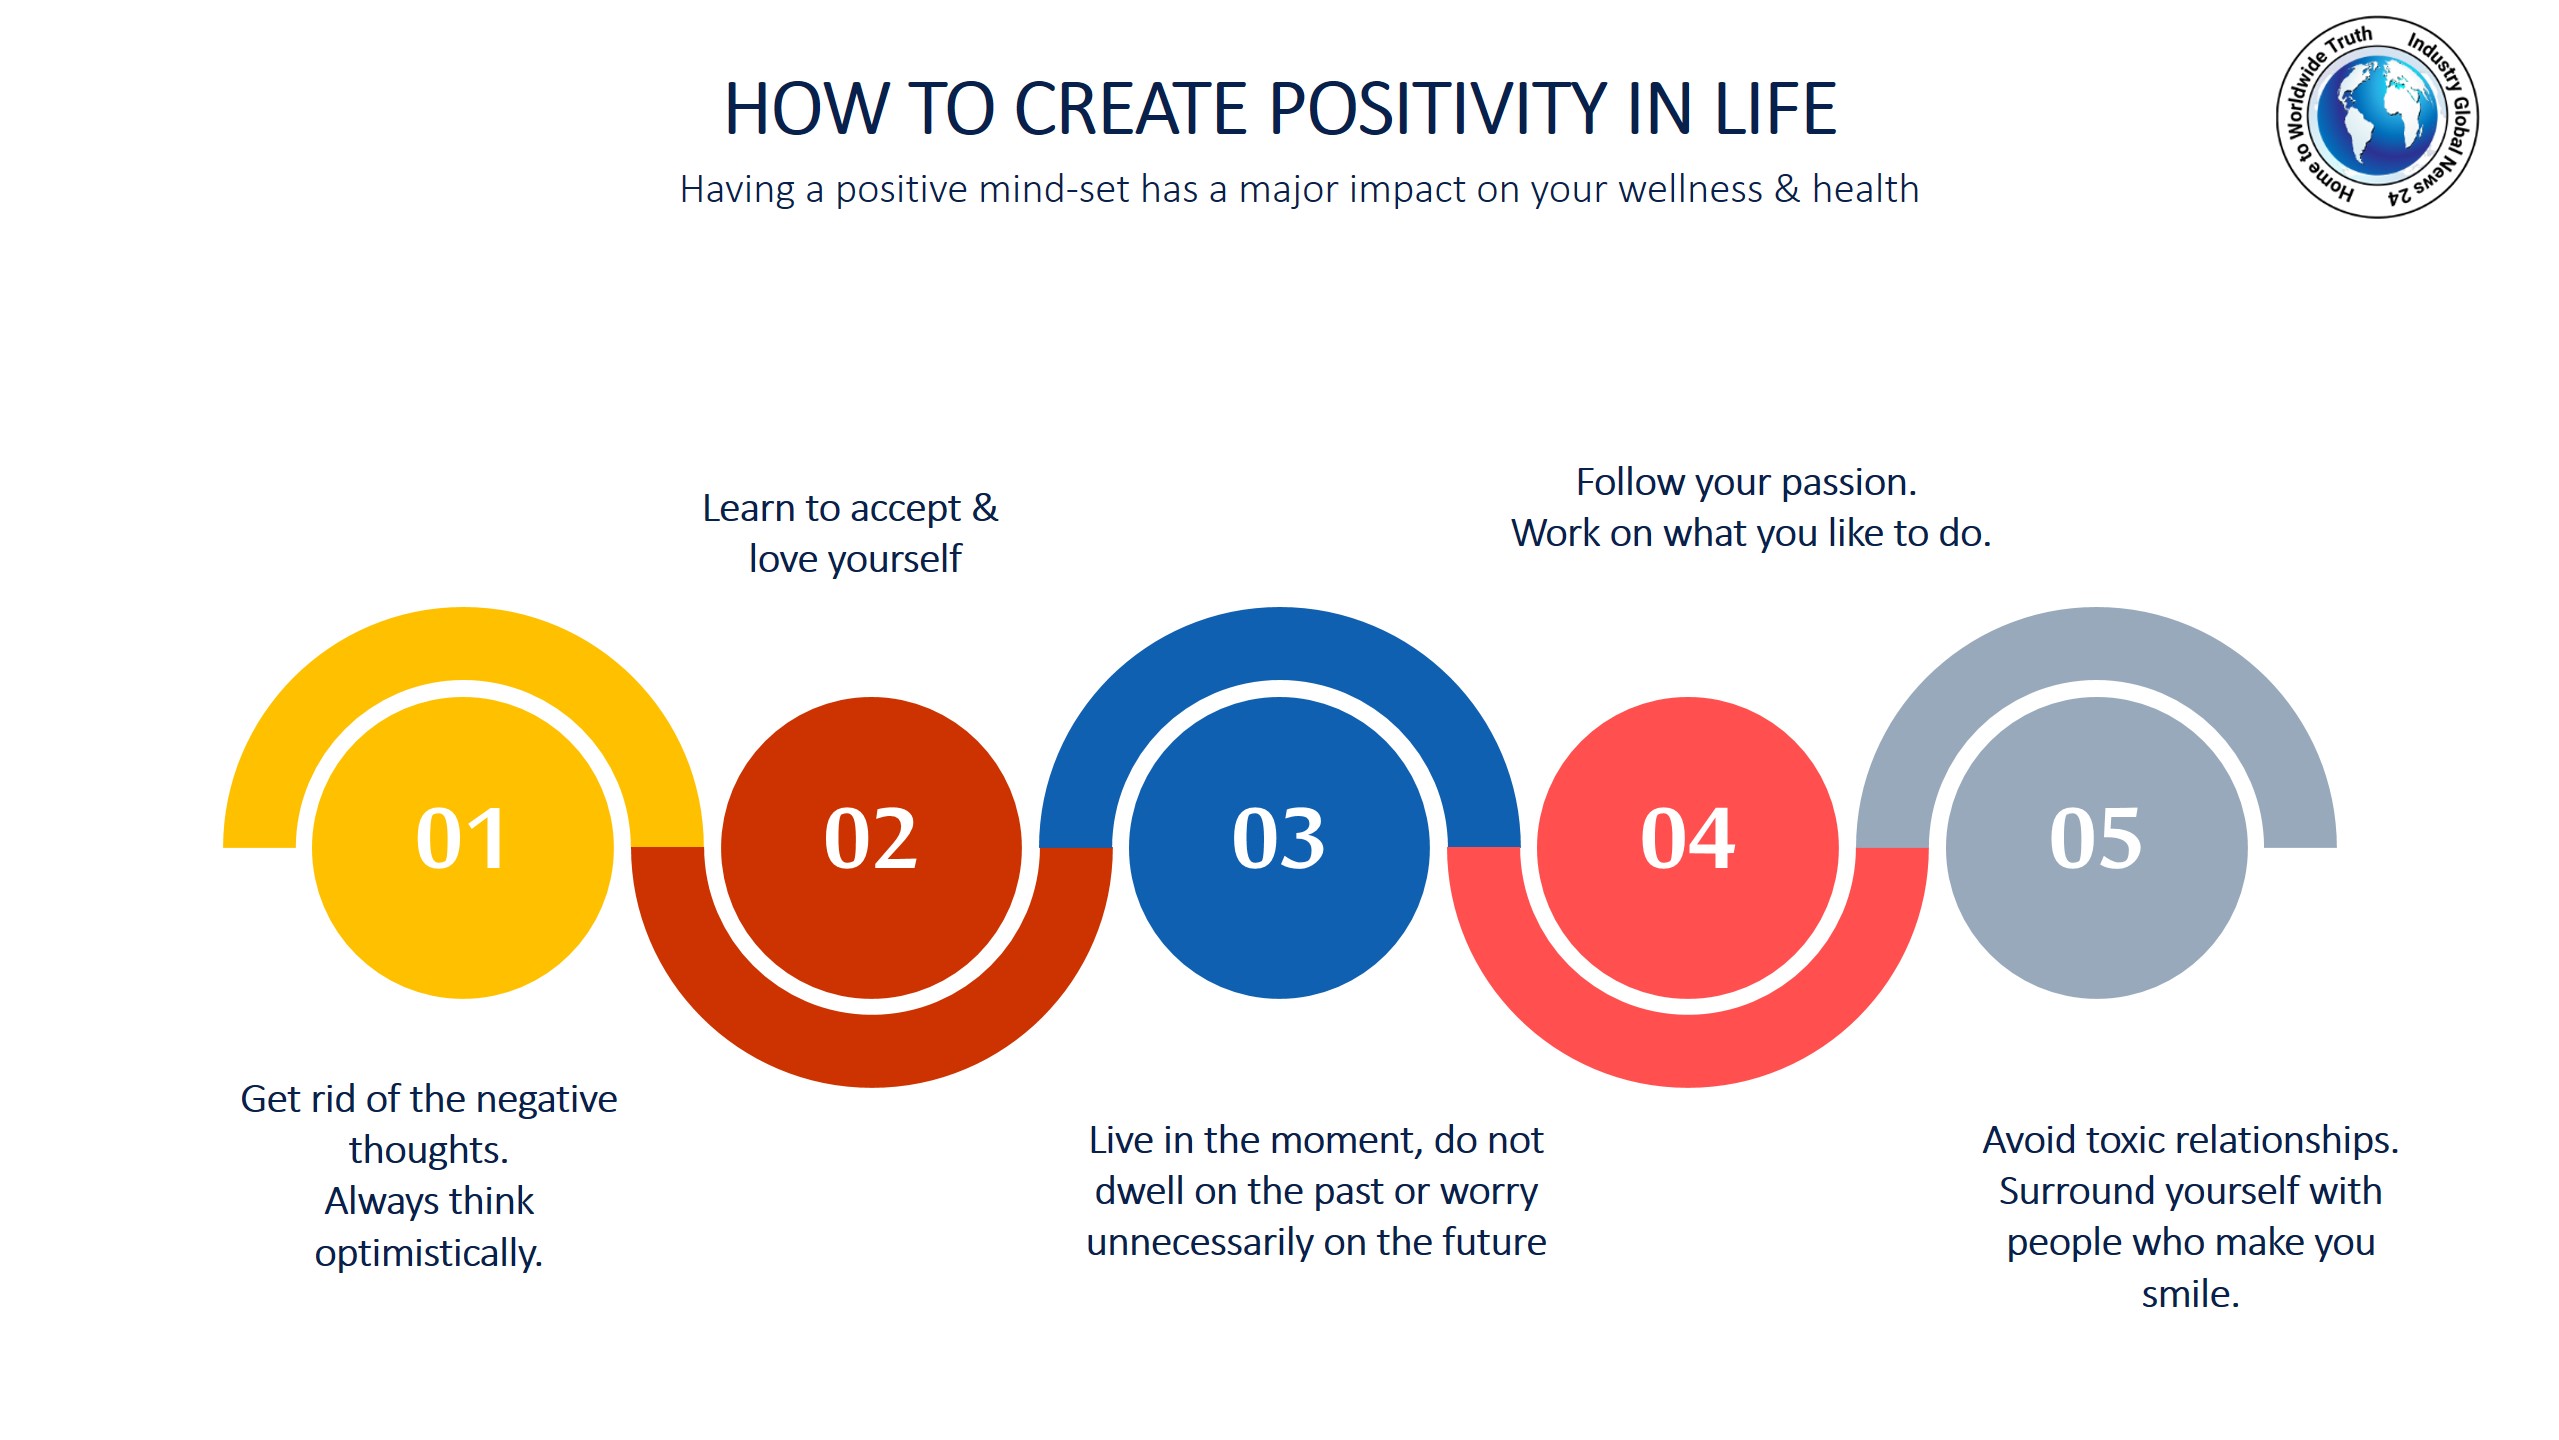 How to create positivity in life